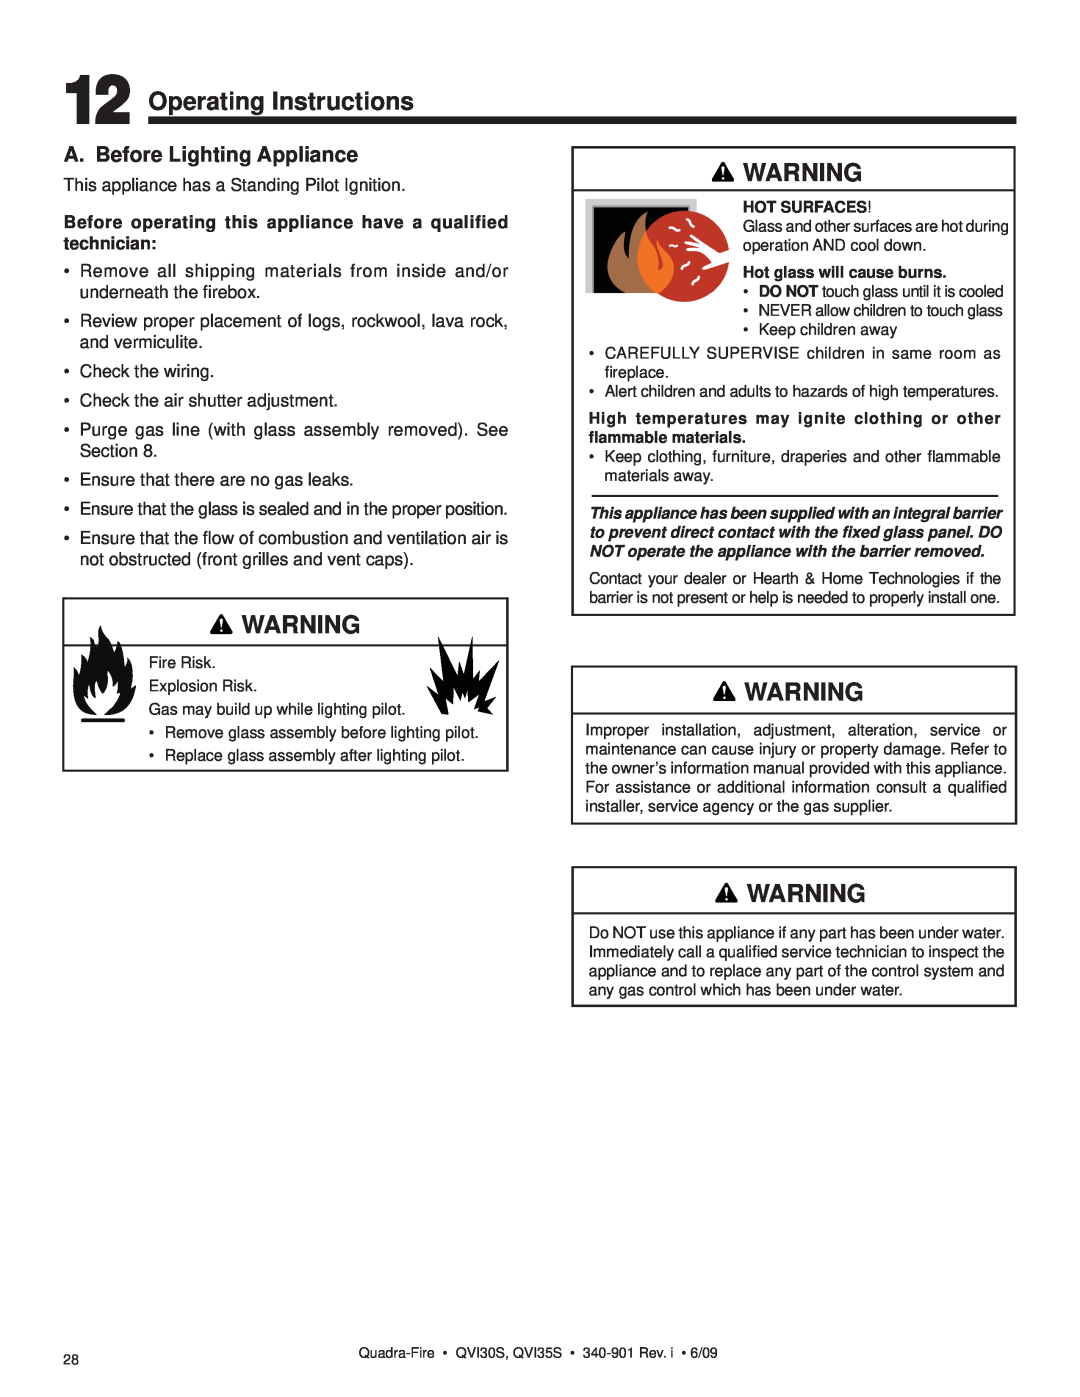 Quadra-Fire QVI35S, QVI30S owner manual Operating Instructions, A. Before Lighting Appliance 